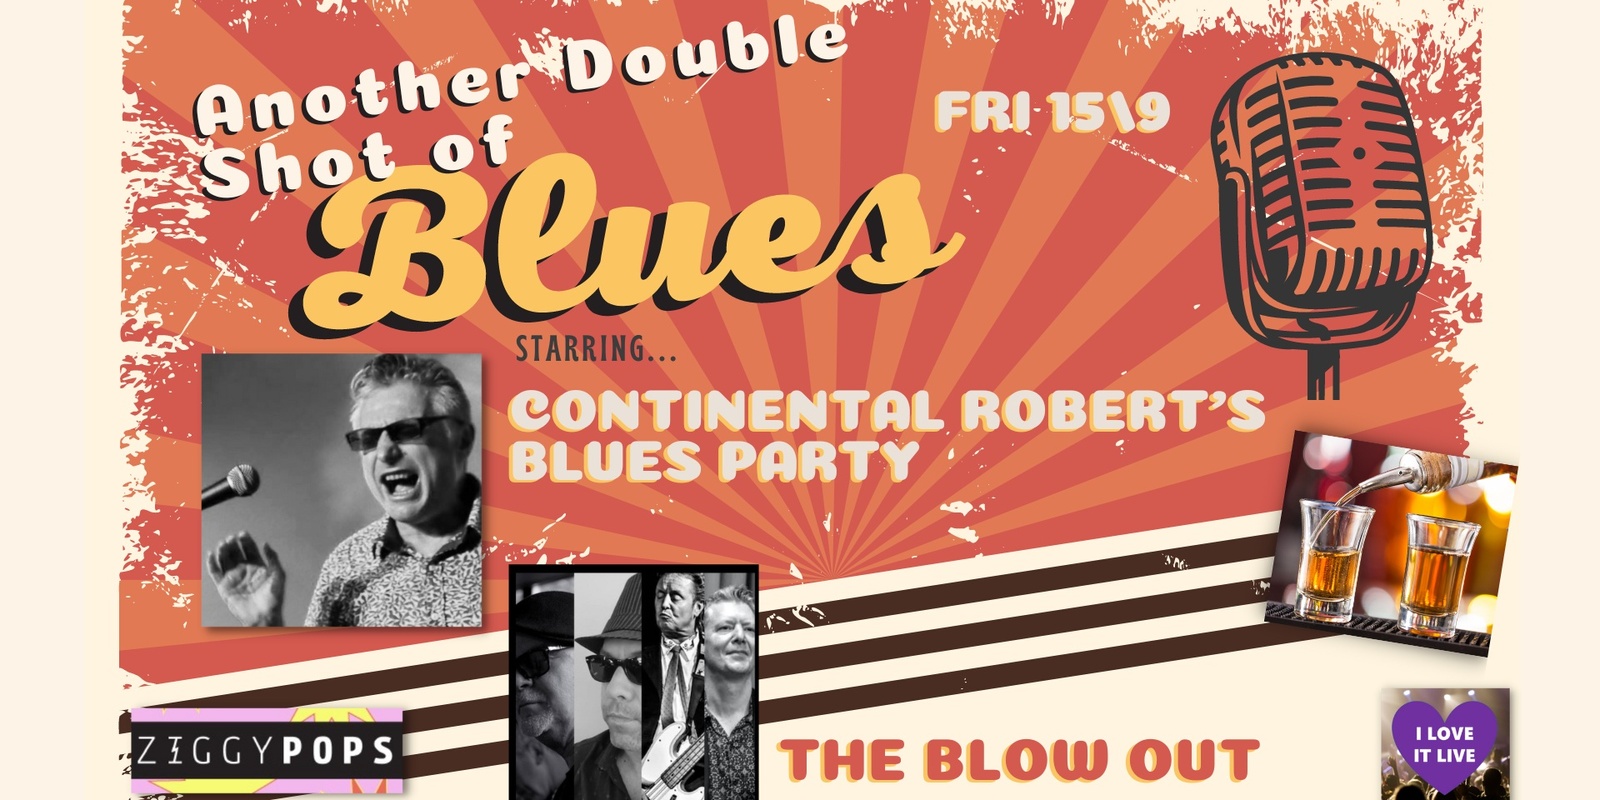 Banner image for A DOUBLE SHOT OF BLUES starring CONTINENTAL ROBERT'S BLUES PARTY/THE BLOWOUT